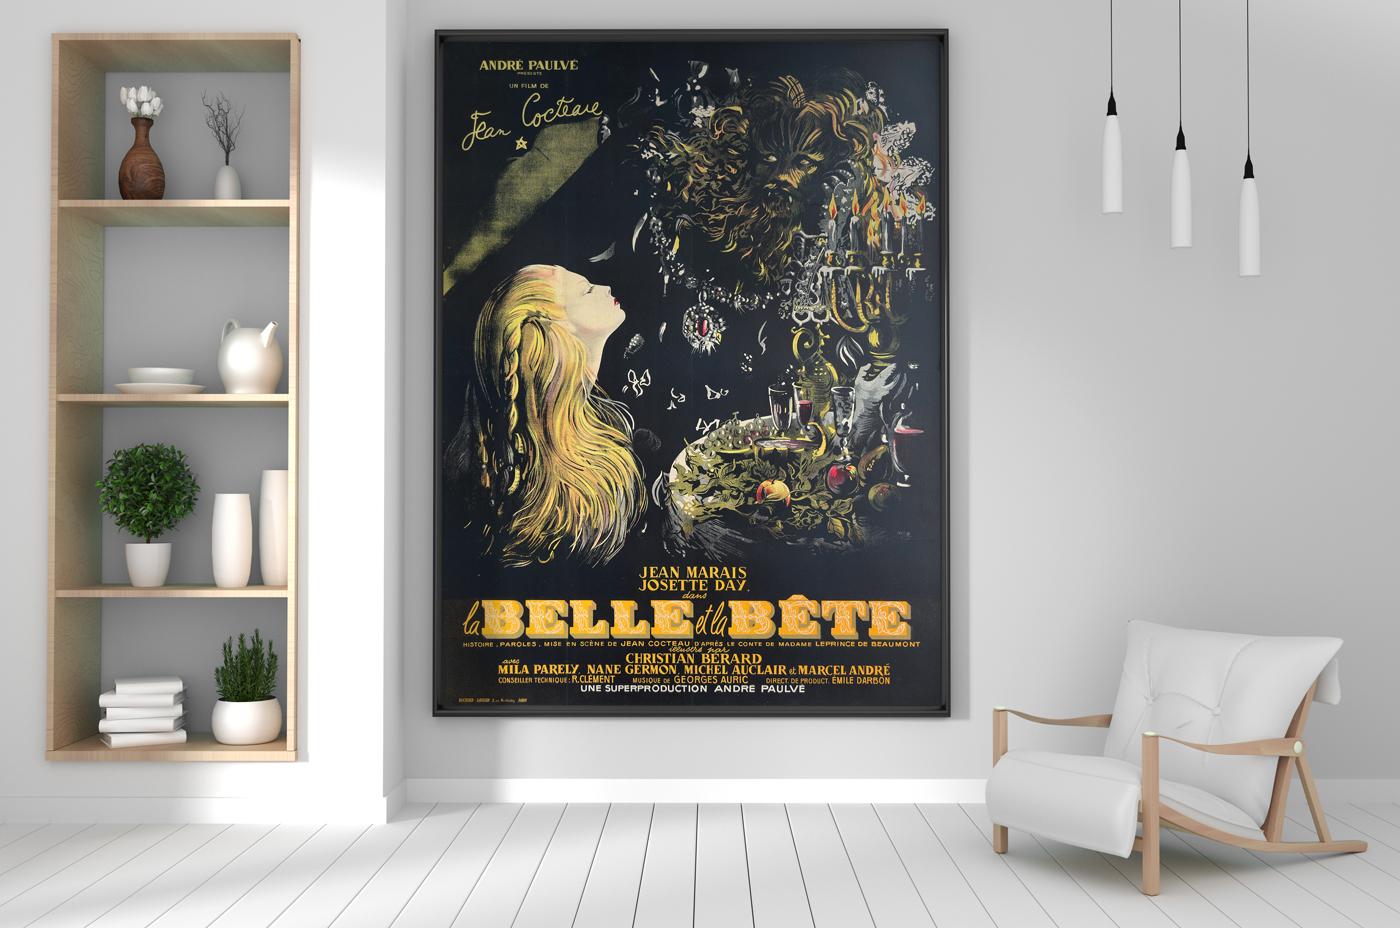 Incredibly beautiful artwork features on this early rerelease.

Beauty and the Beast - La Belle et la Bête is a 1946 French romantic fantasy film. Directed by French poet and filmmaker Jean Cocteau. Starring Josette Day as Belle and Jean Marais as